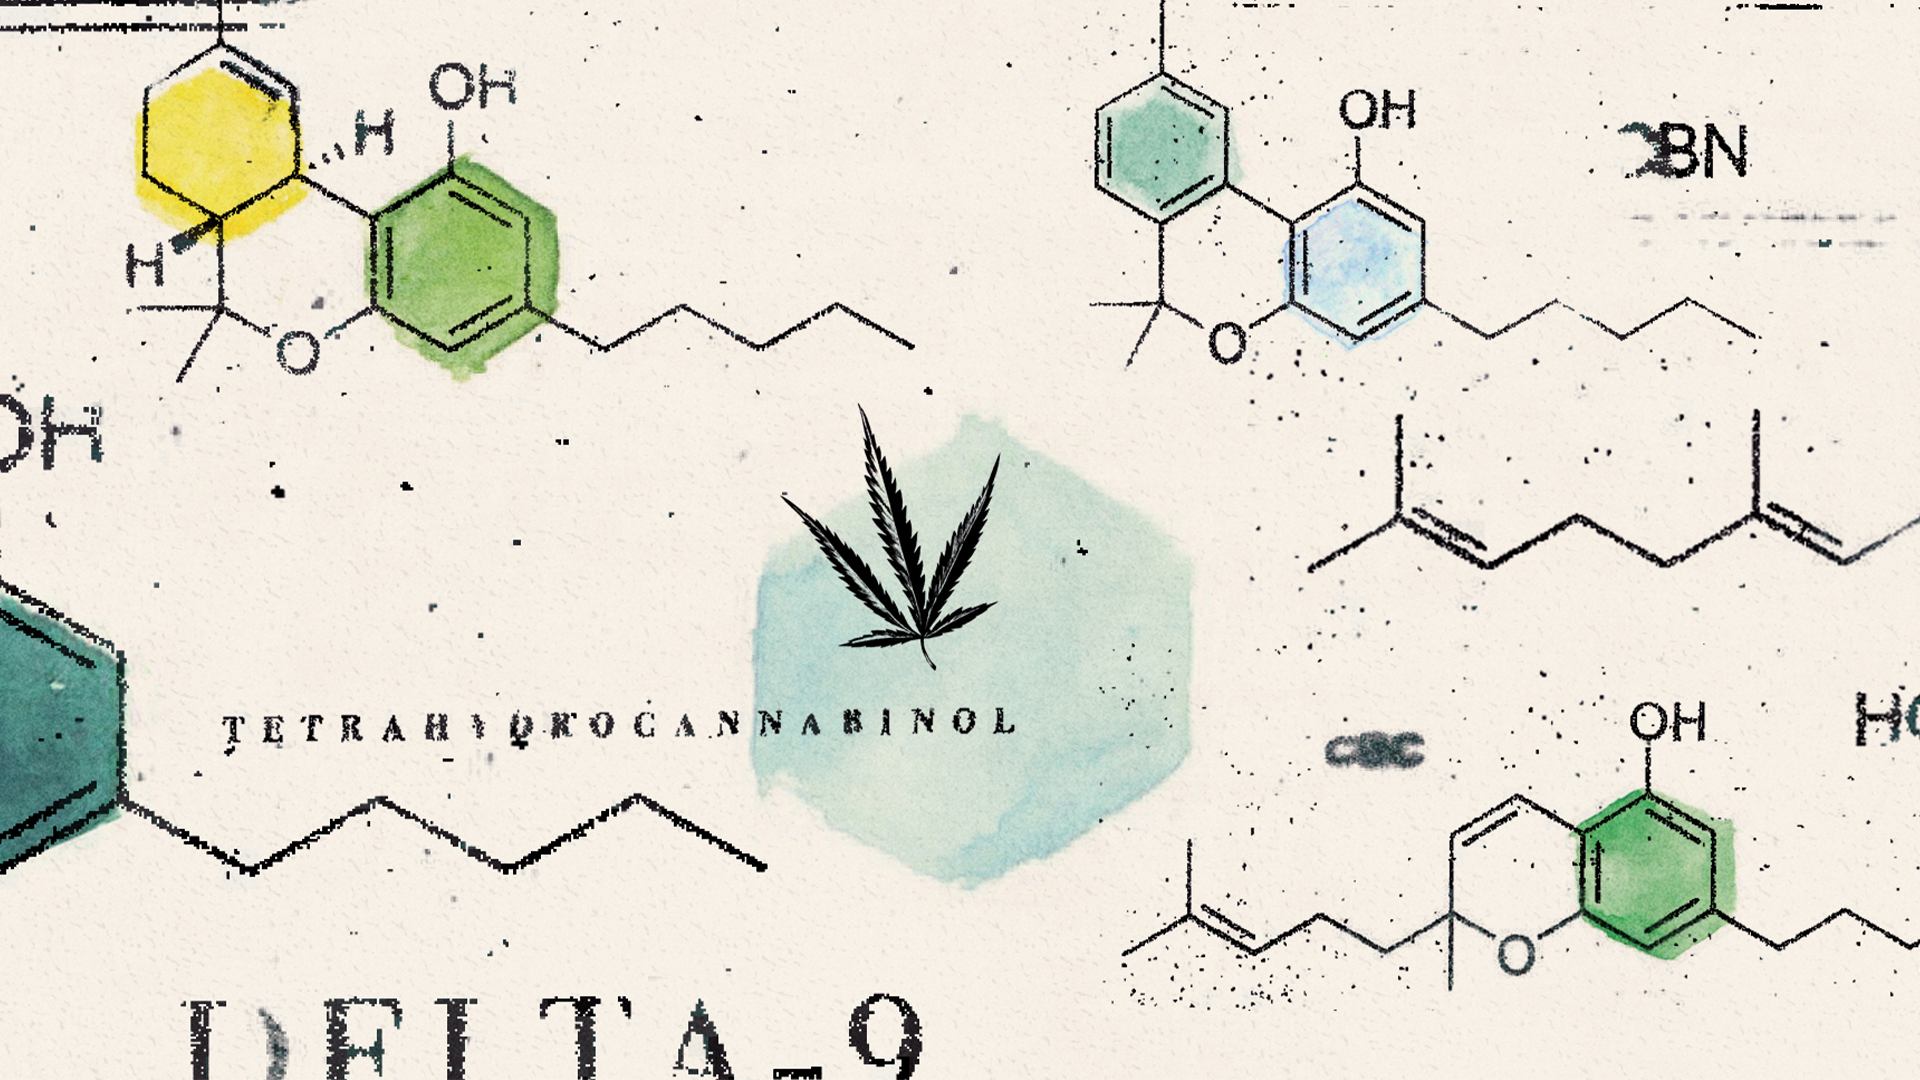 Chemical symbols for THC and other cannabinoids